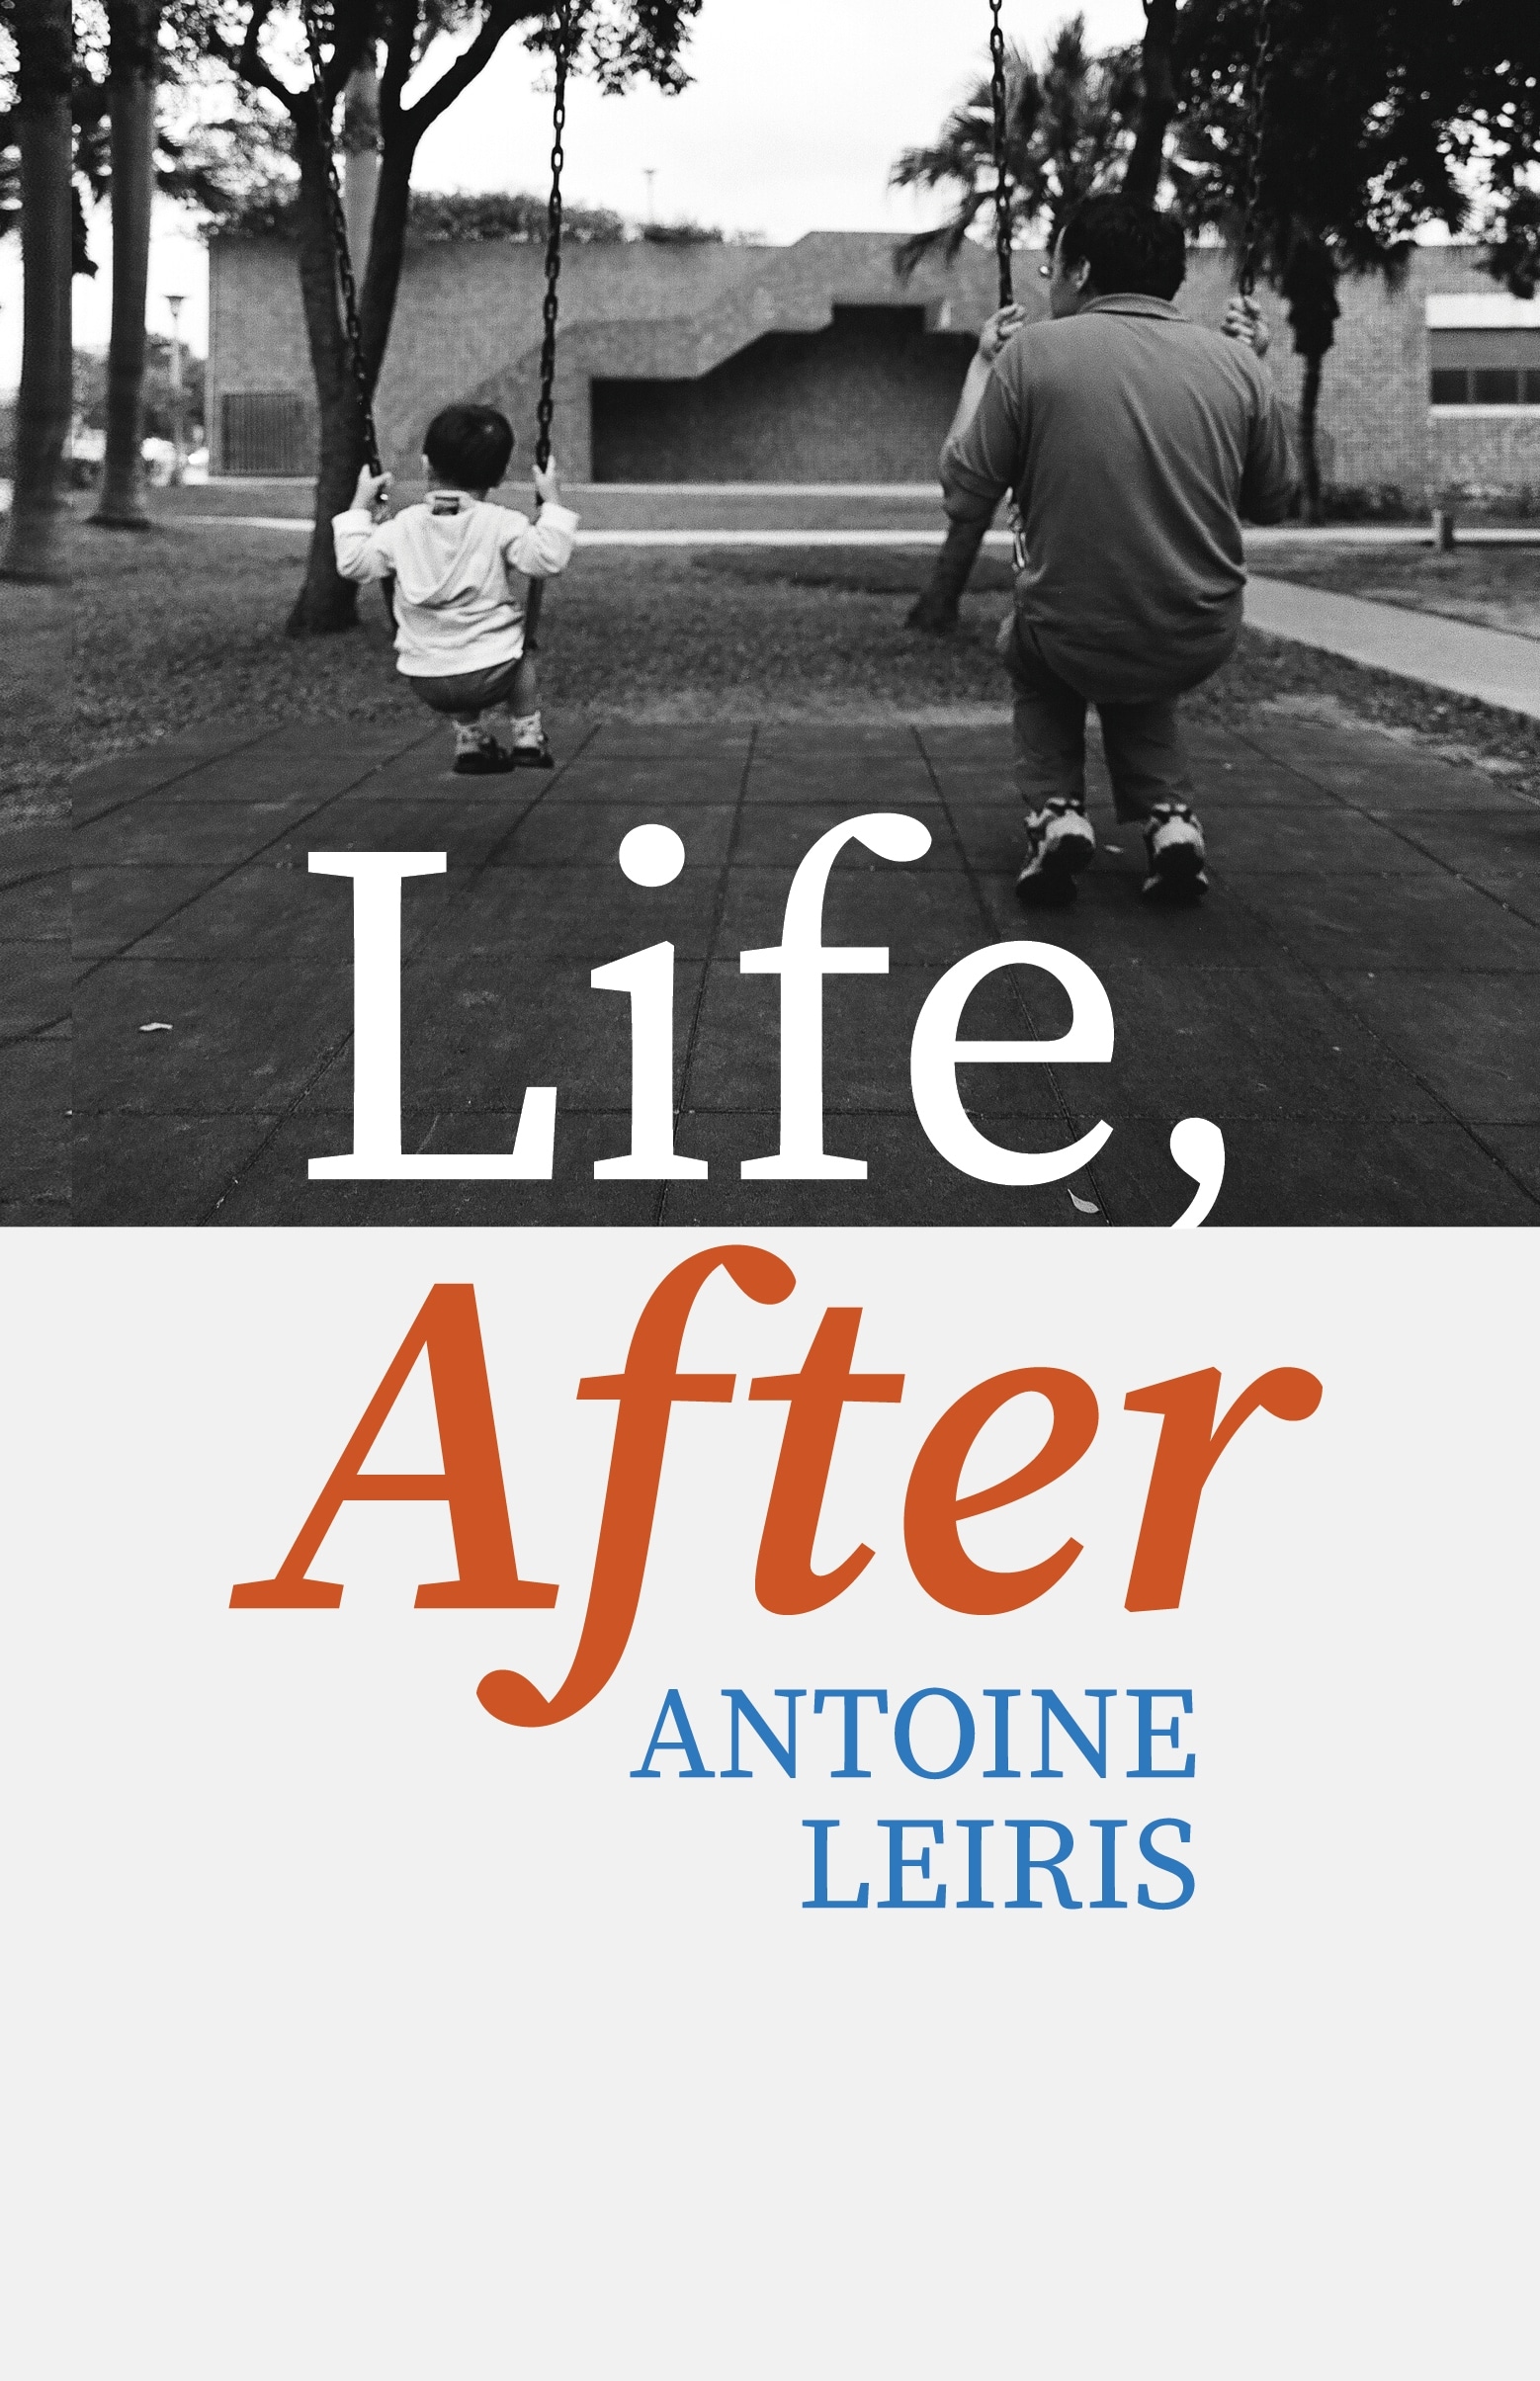 Book “Life, After” by Antoine Leiris — February 3, 2022